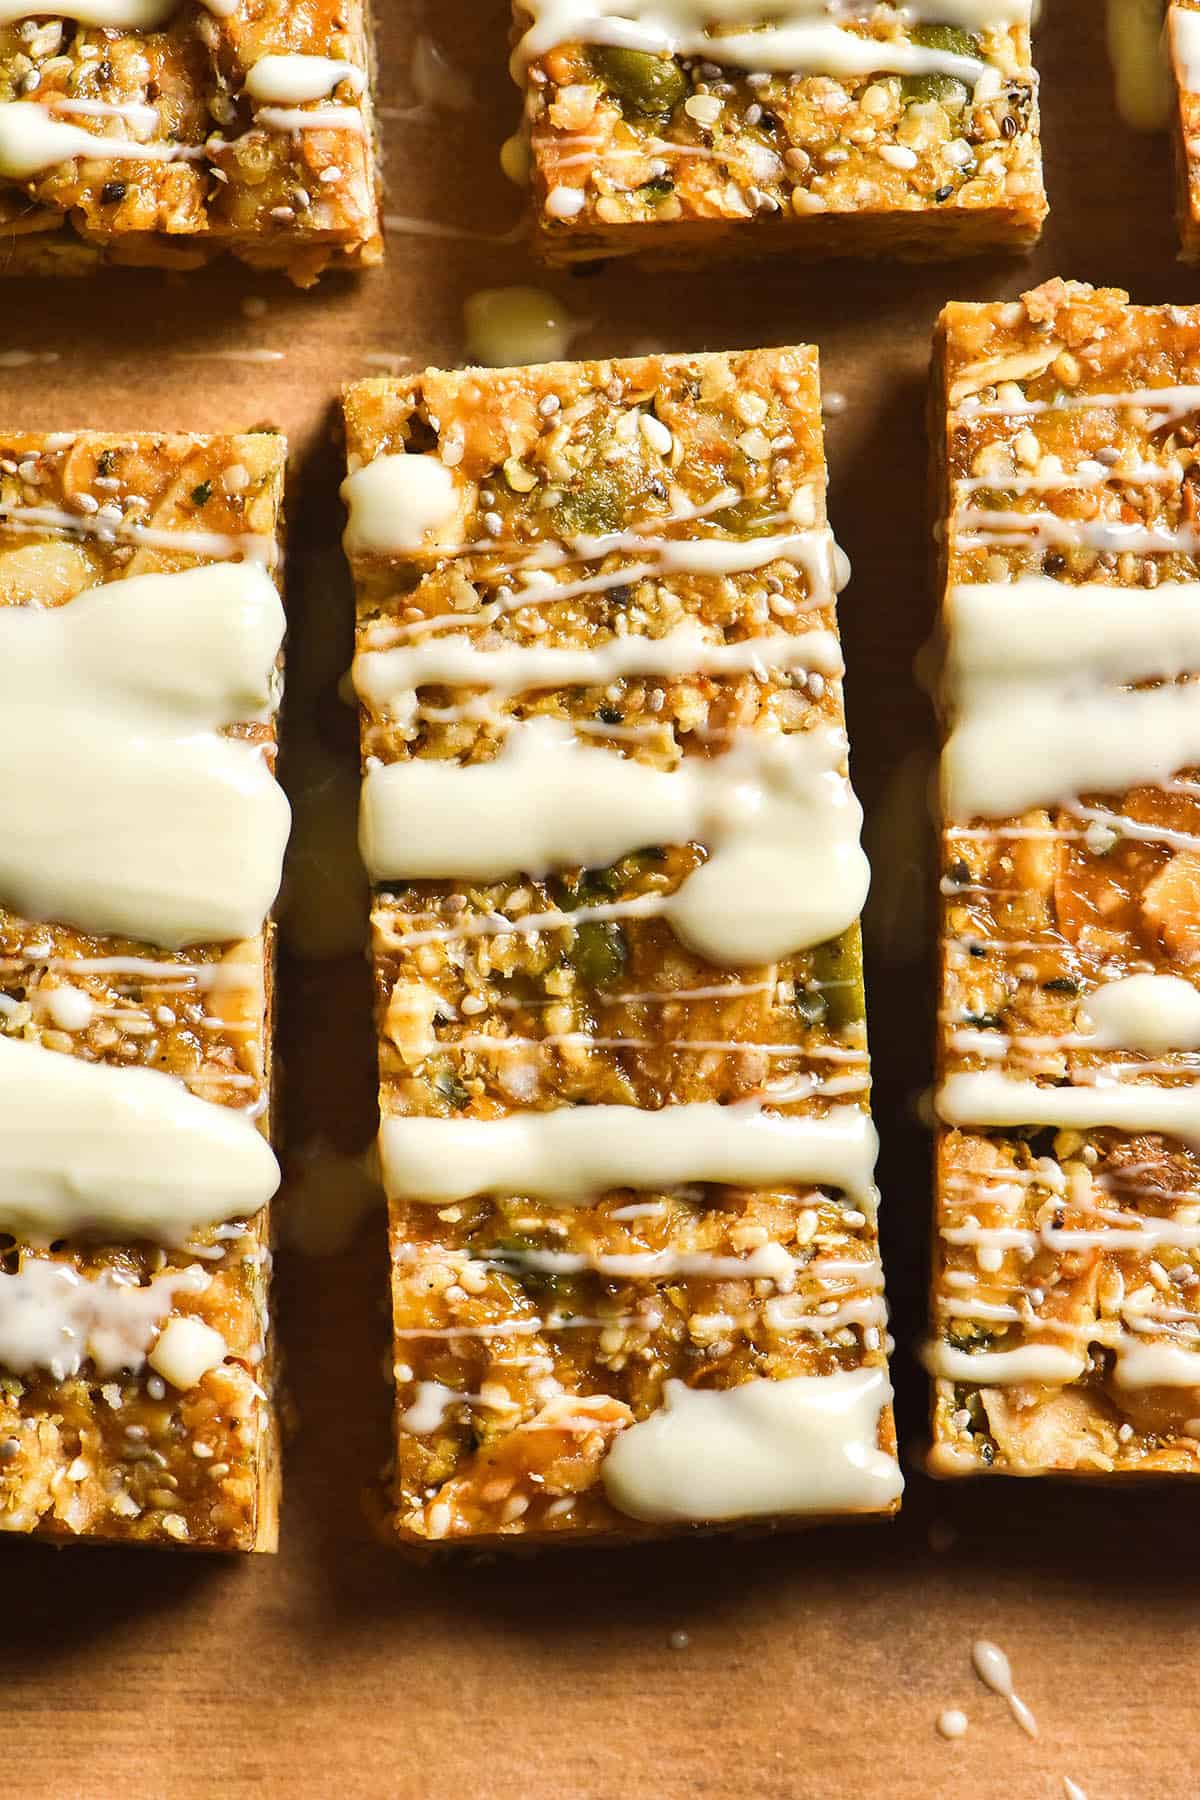 An aerial close up image of gluten free granola bars on brown baking paper that have been drizzled with white chocolate